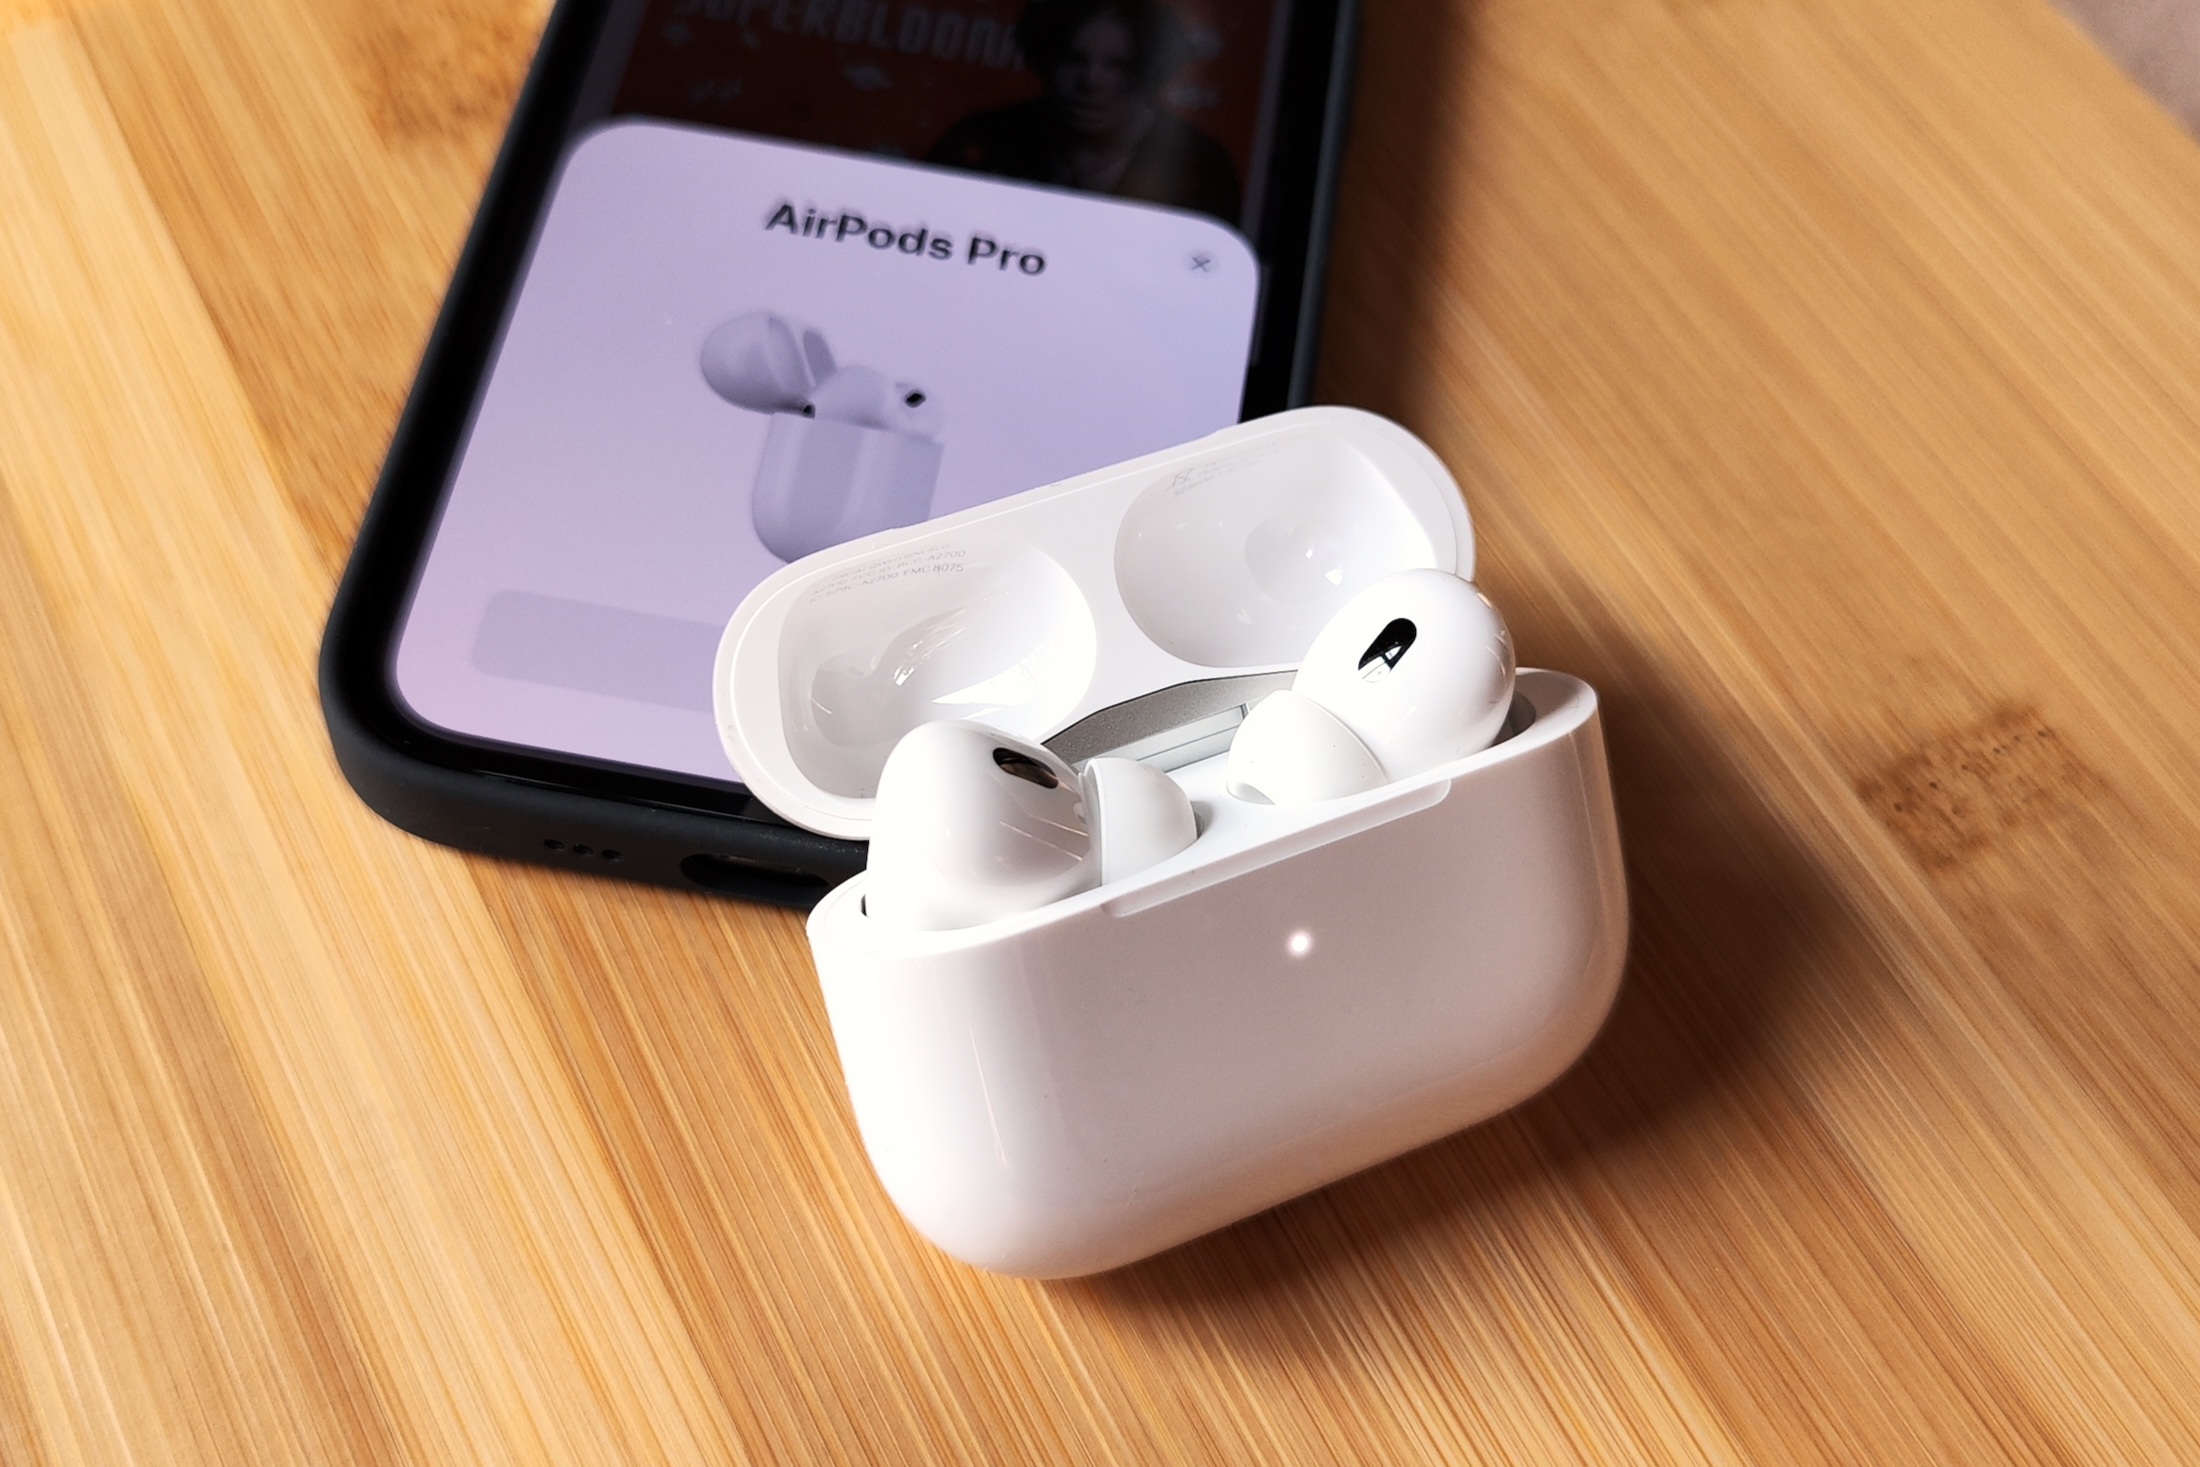 This touchscreen AirPods case is the worst thing I've seen all week